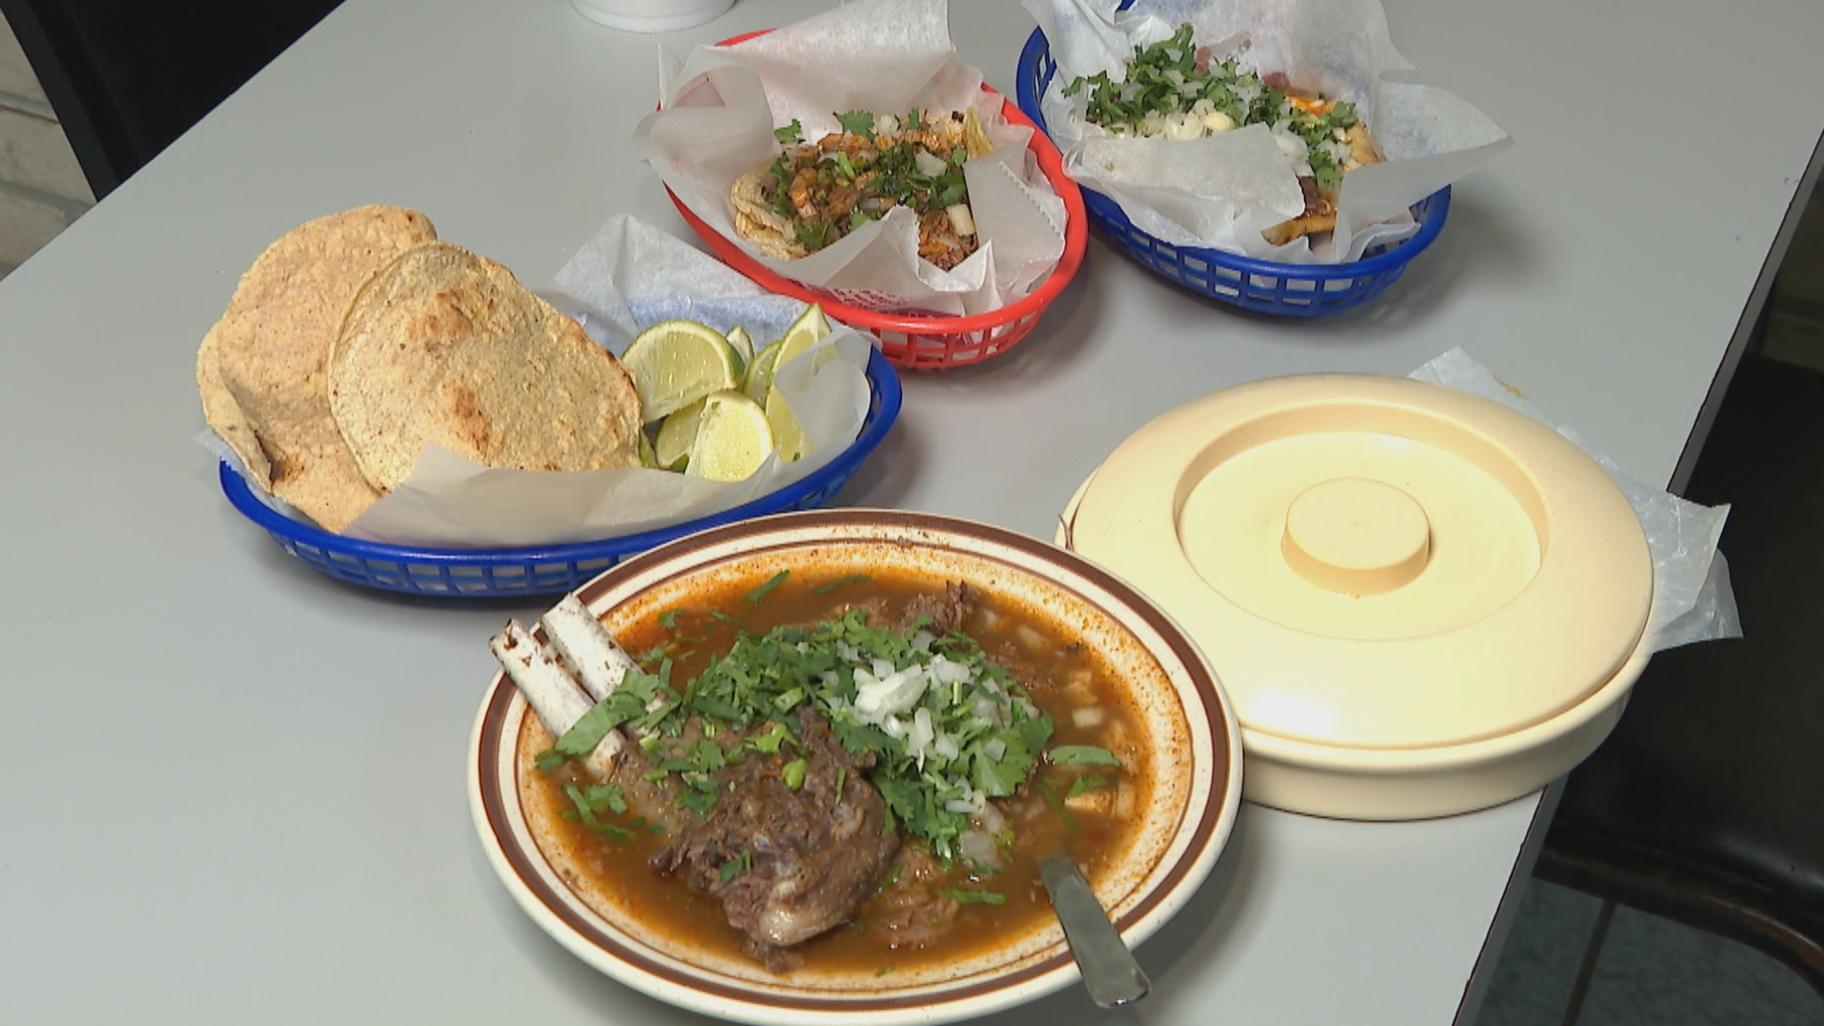 The Reyes family’s birria recipe goes back to 1926, when Andy Reyes’ great-grandfather developed his own version of the stewed goat dish in Ocotlan, Jalisco. (WTTW News)